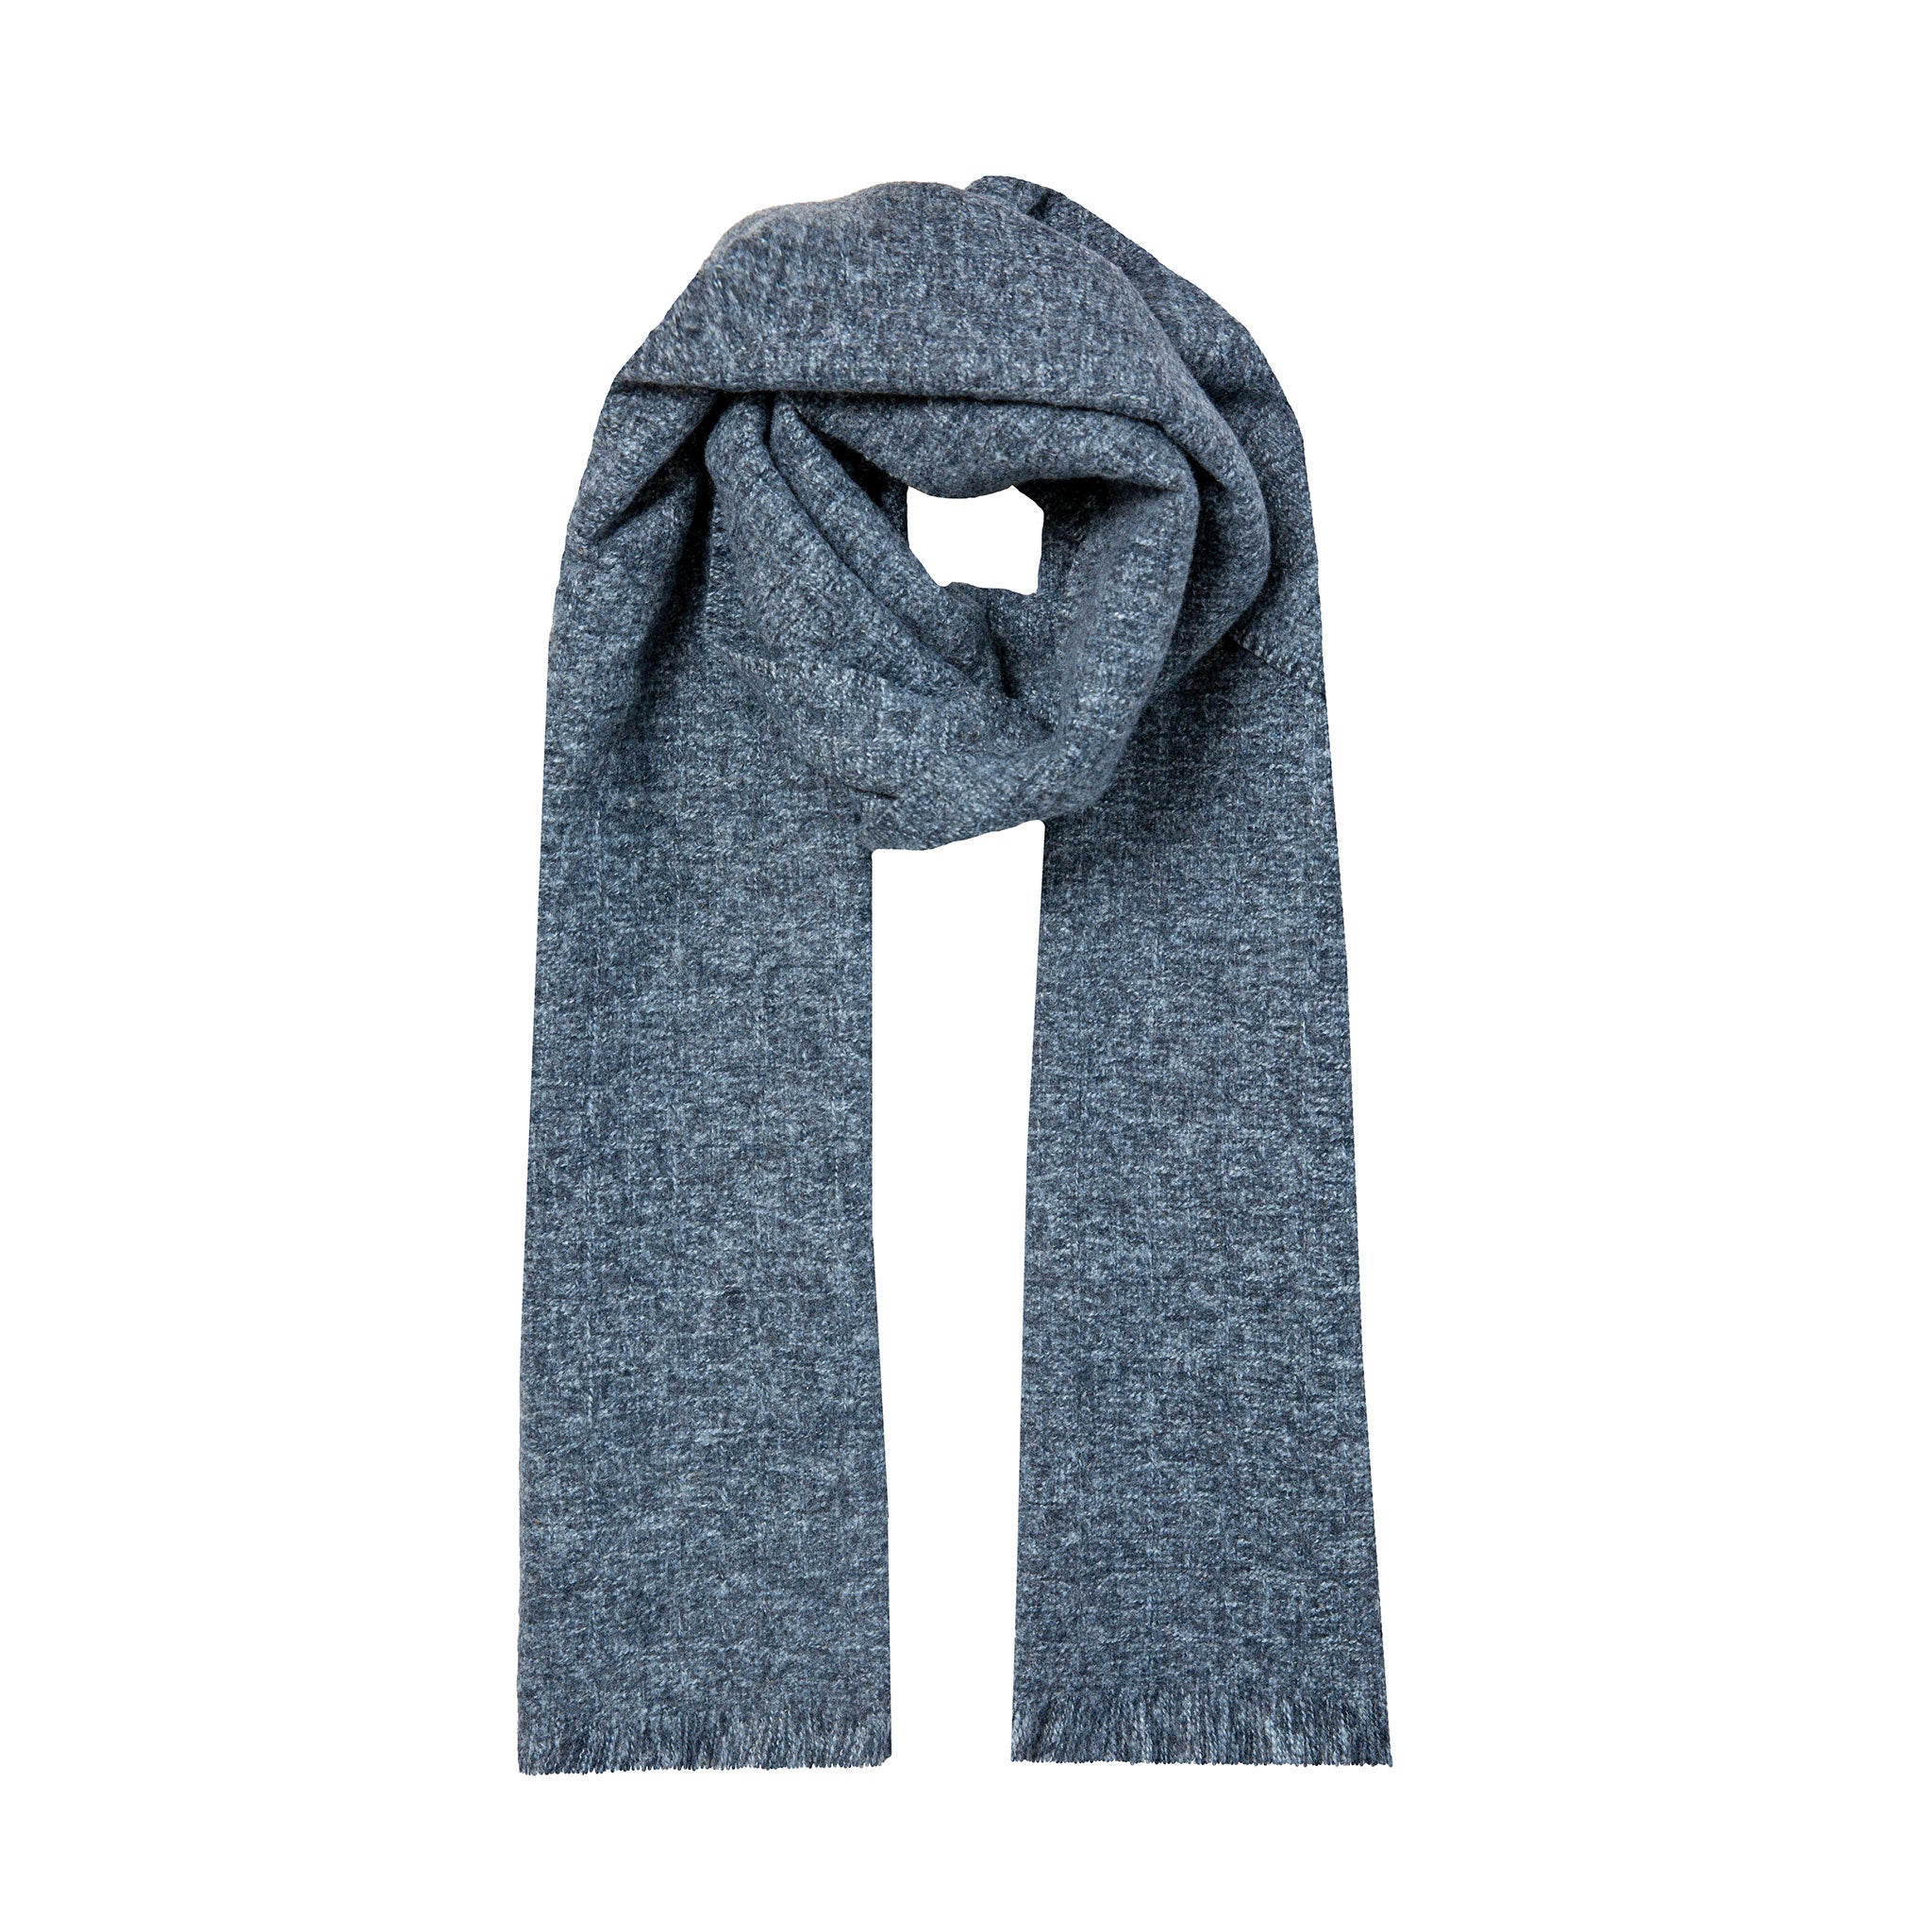 The Scarf - Charcoal Marl